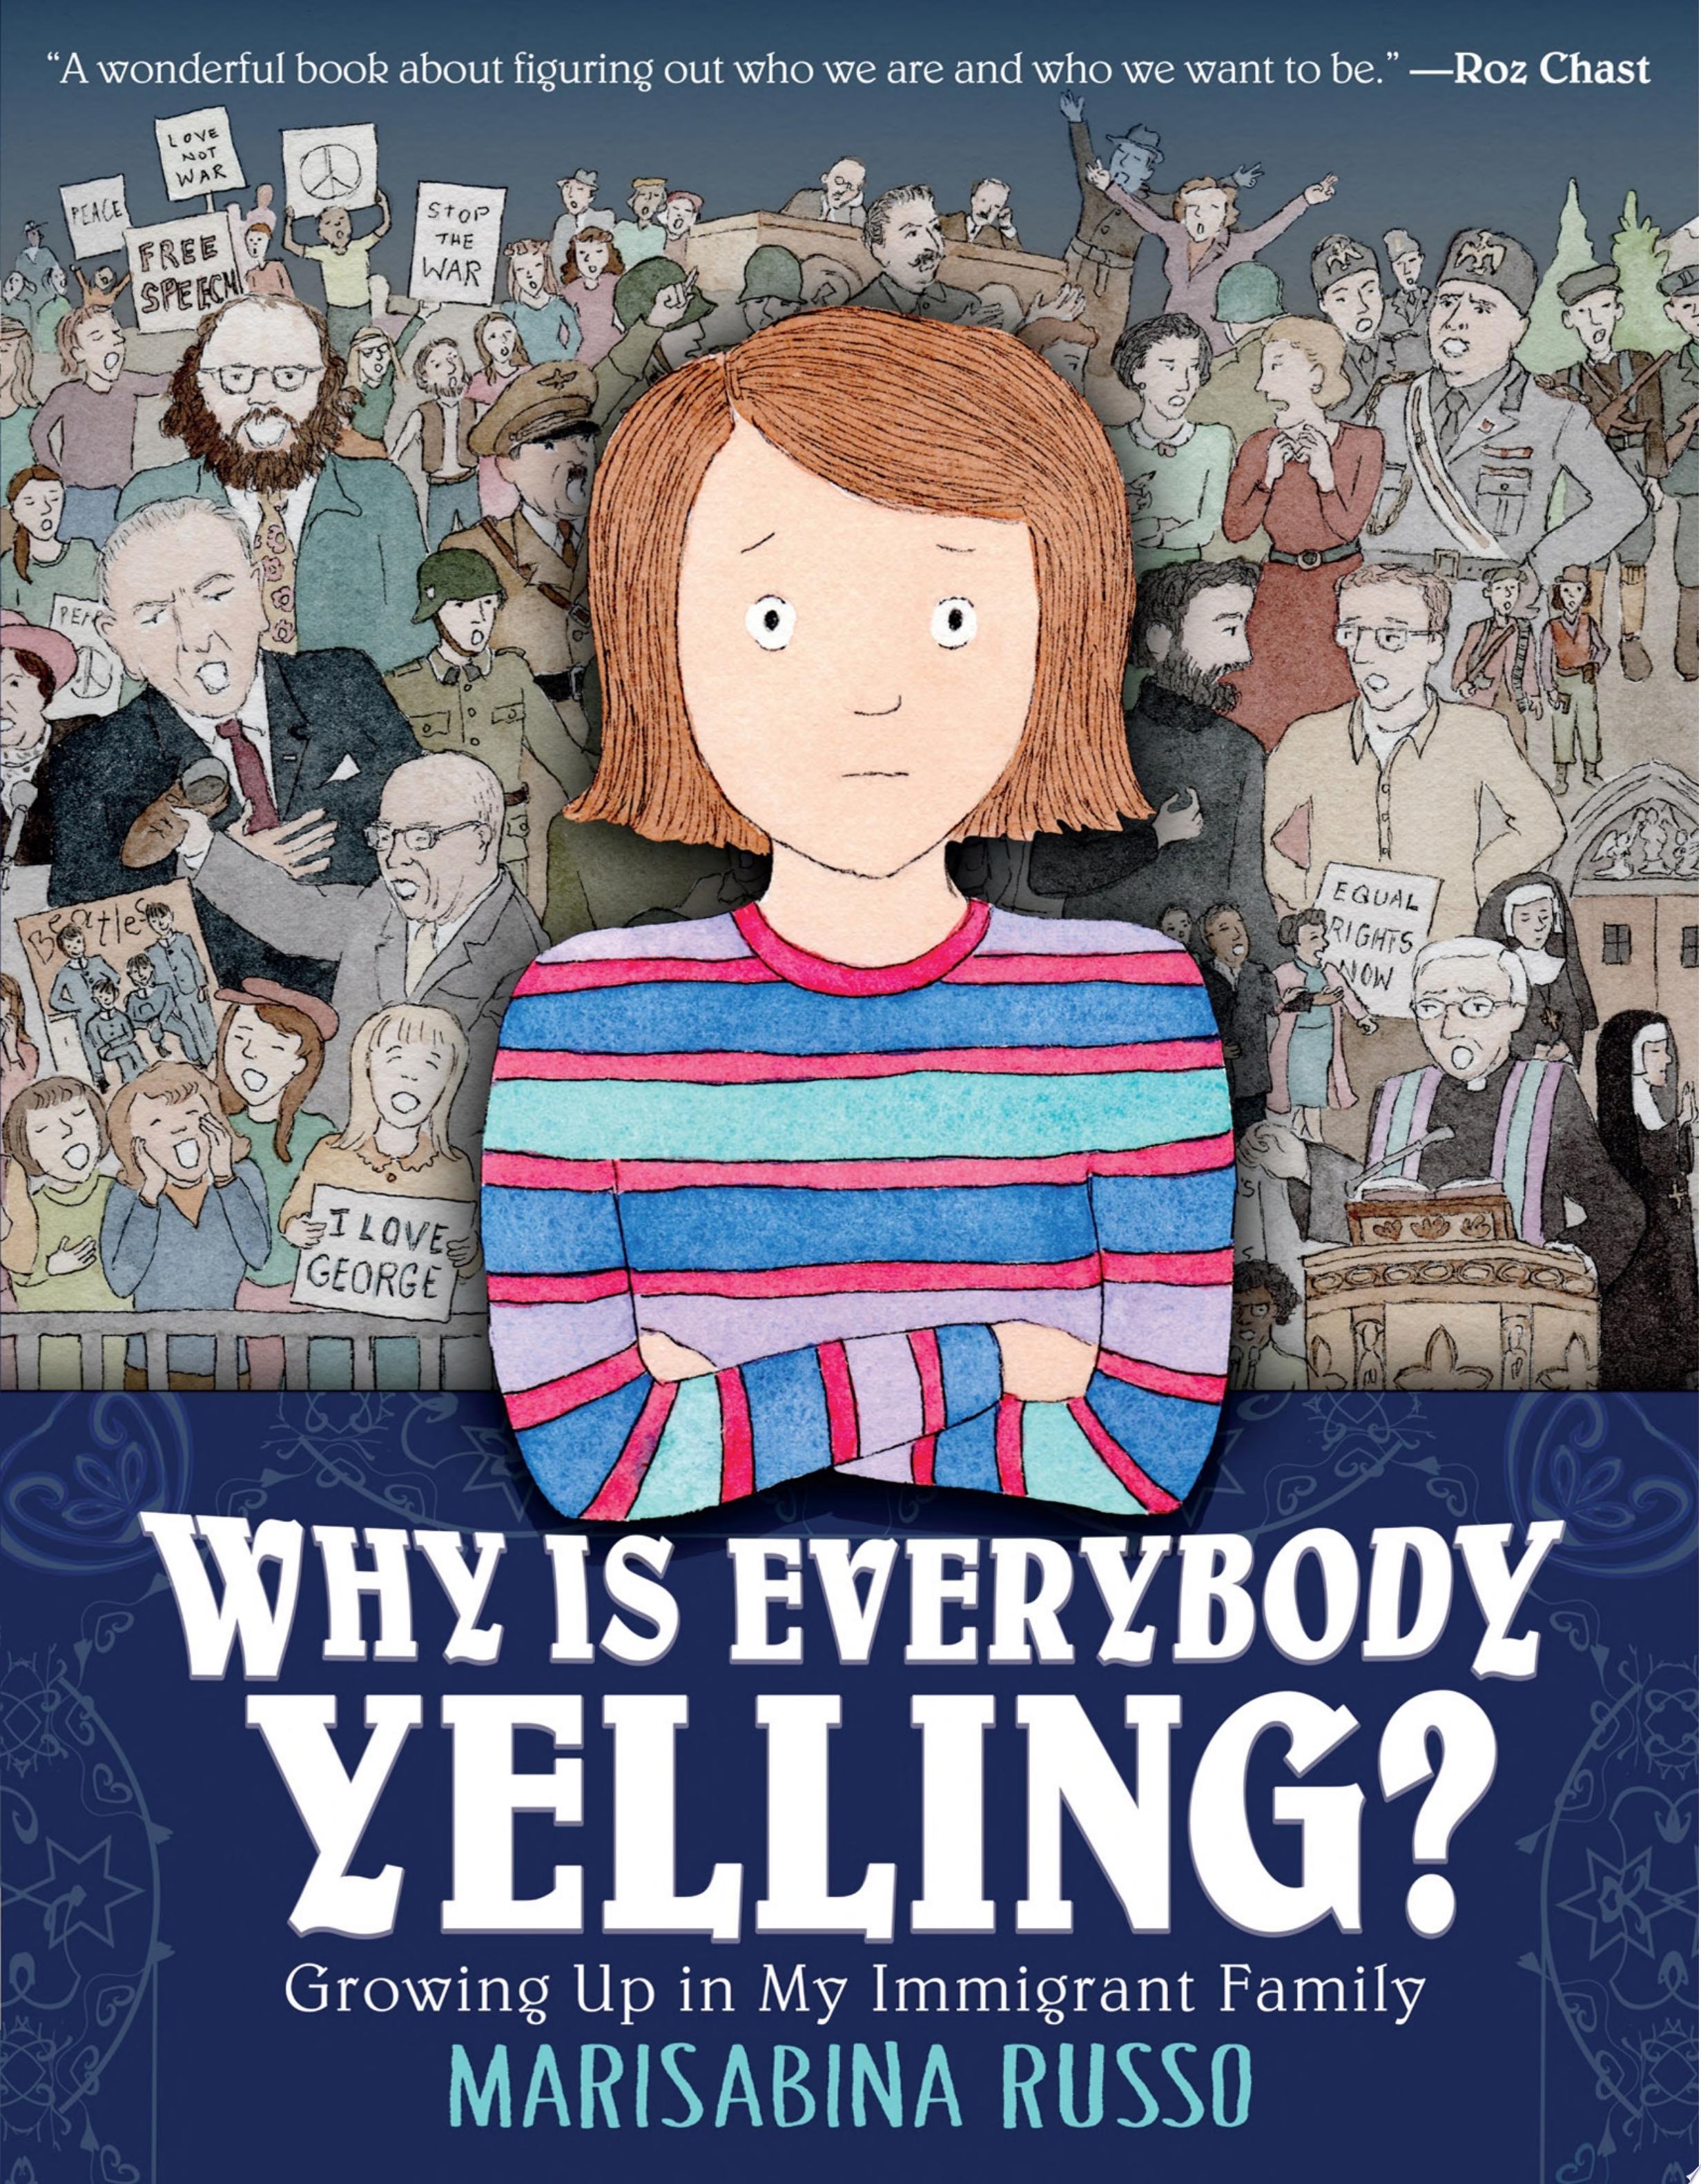 Image for "Why Is Everybody Yelling?"